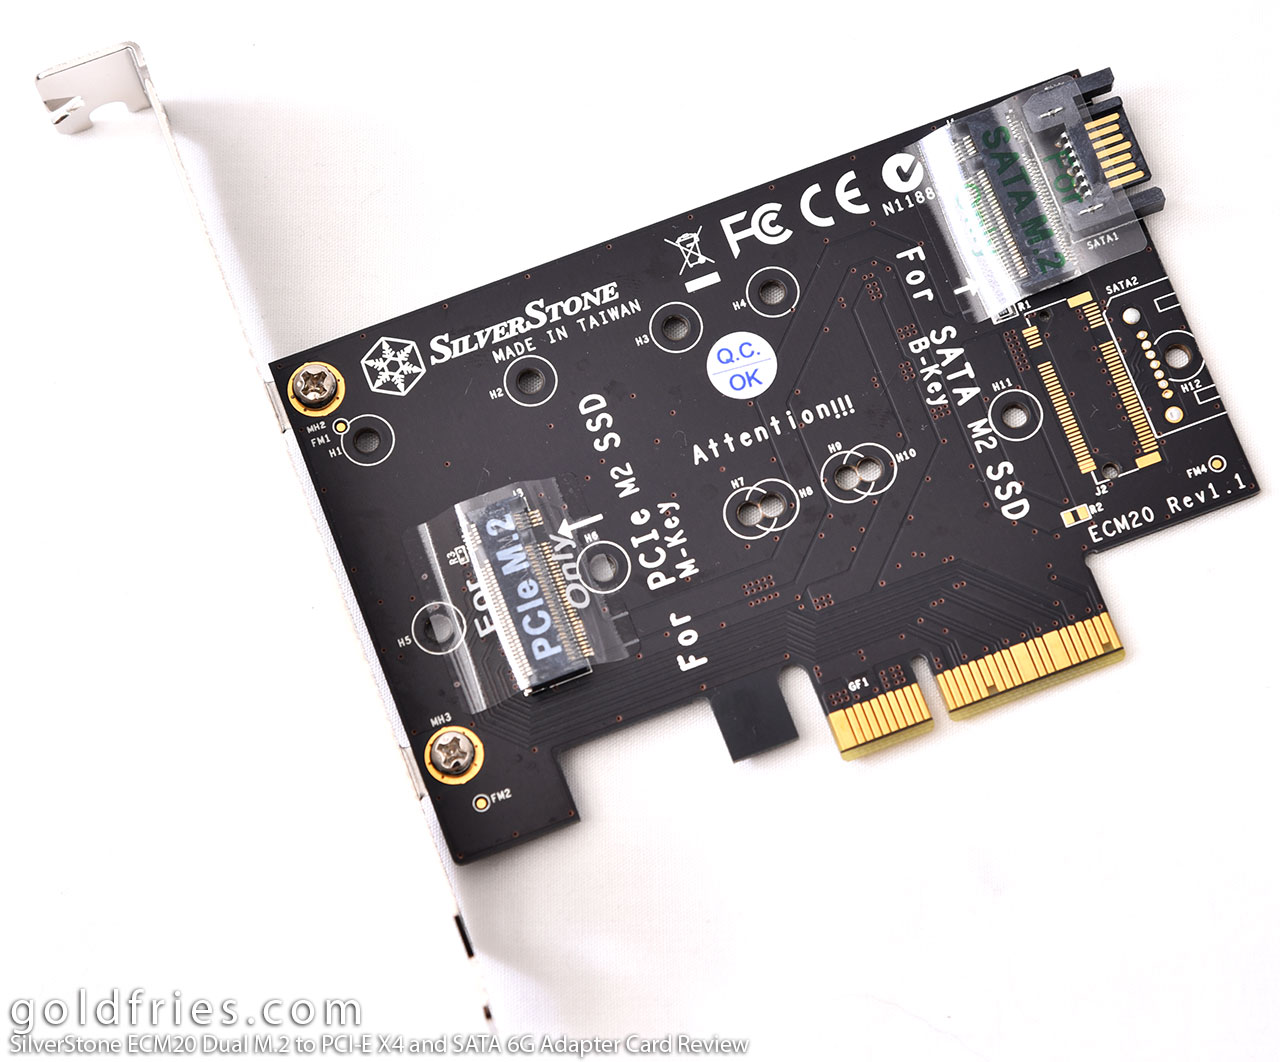 SilverStone ECM20 Dual M.2 to PCI-E X4 and SATA 6G Adapter Card Review